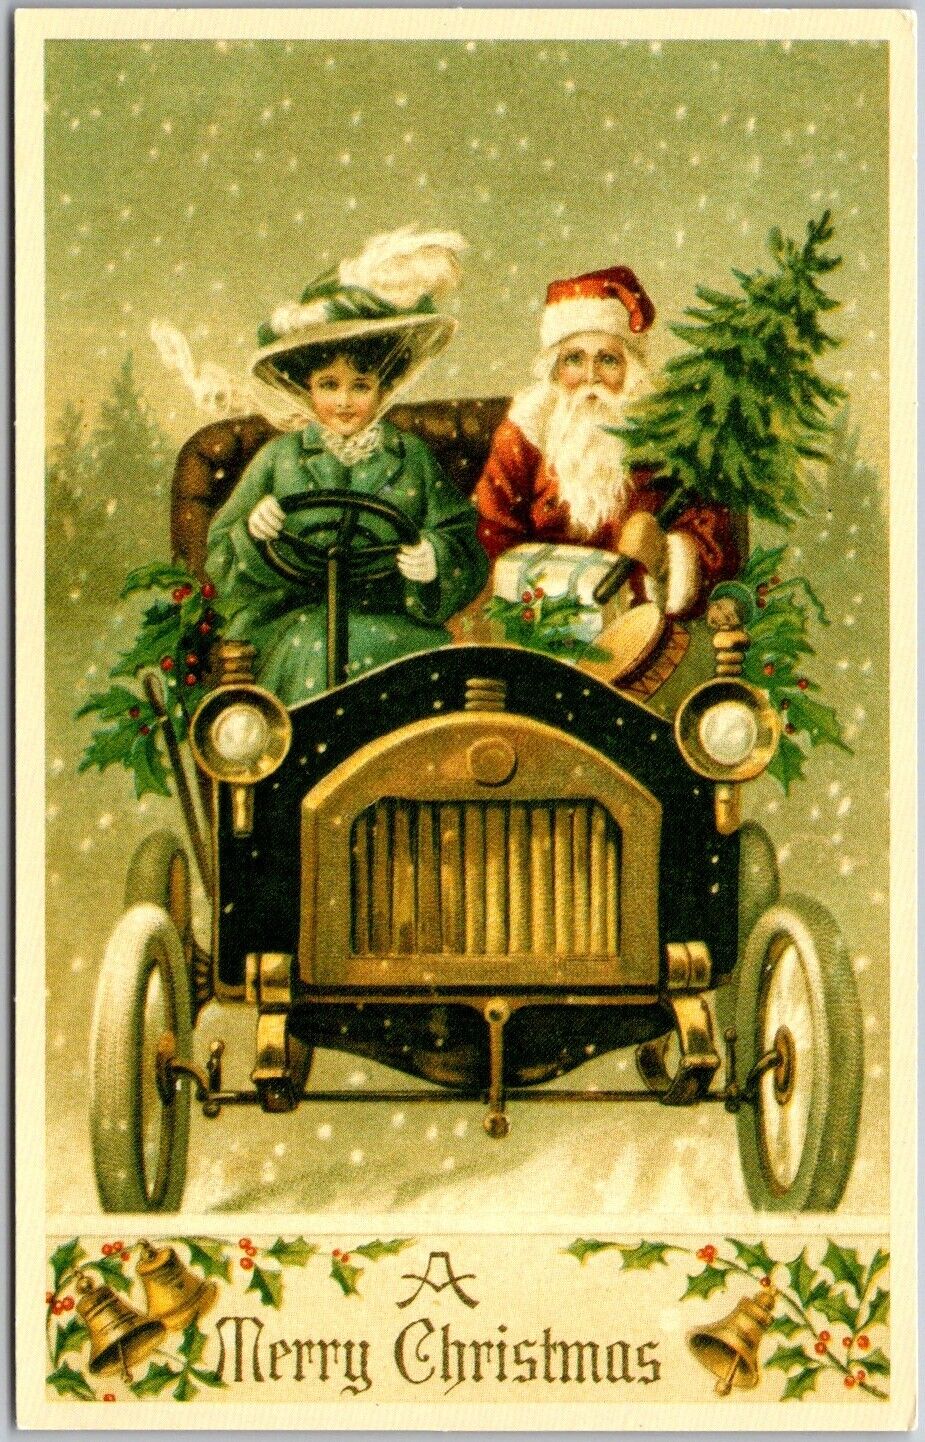 Postcard: Merry Christmas Greetings - Vintage Reproduction A104